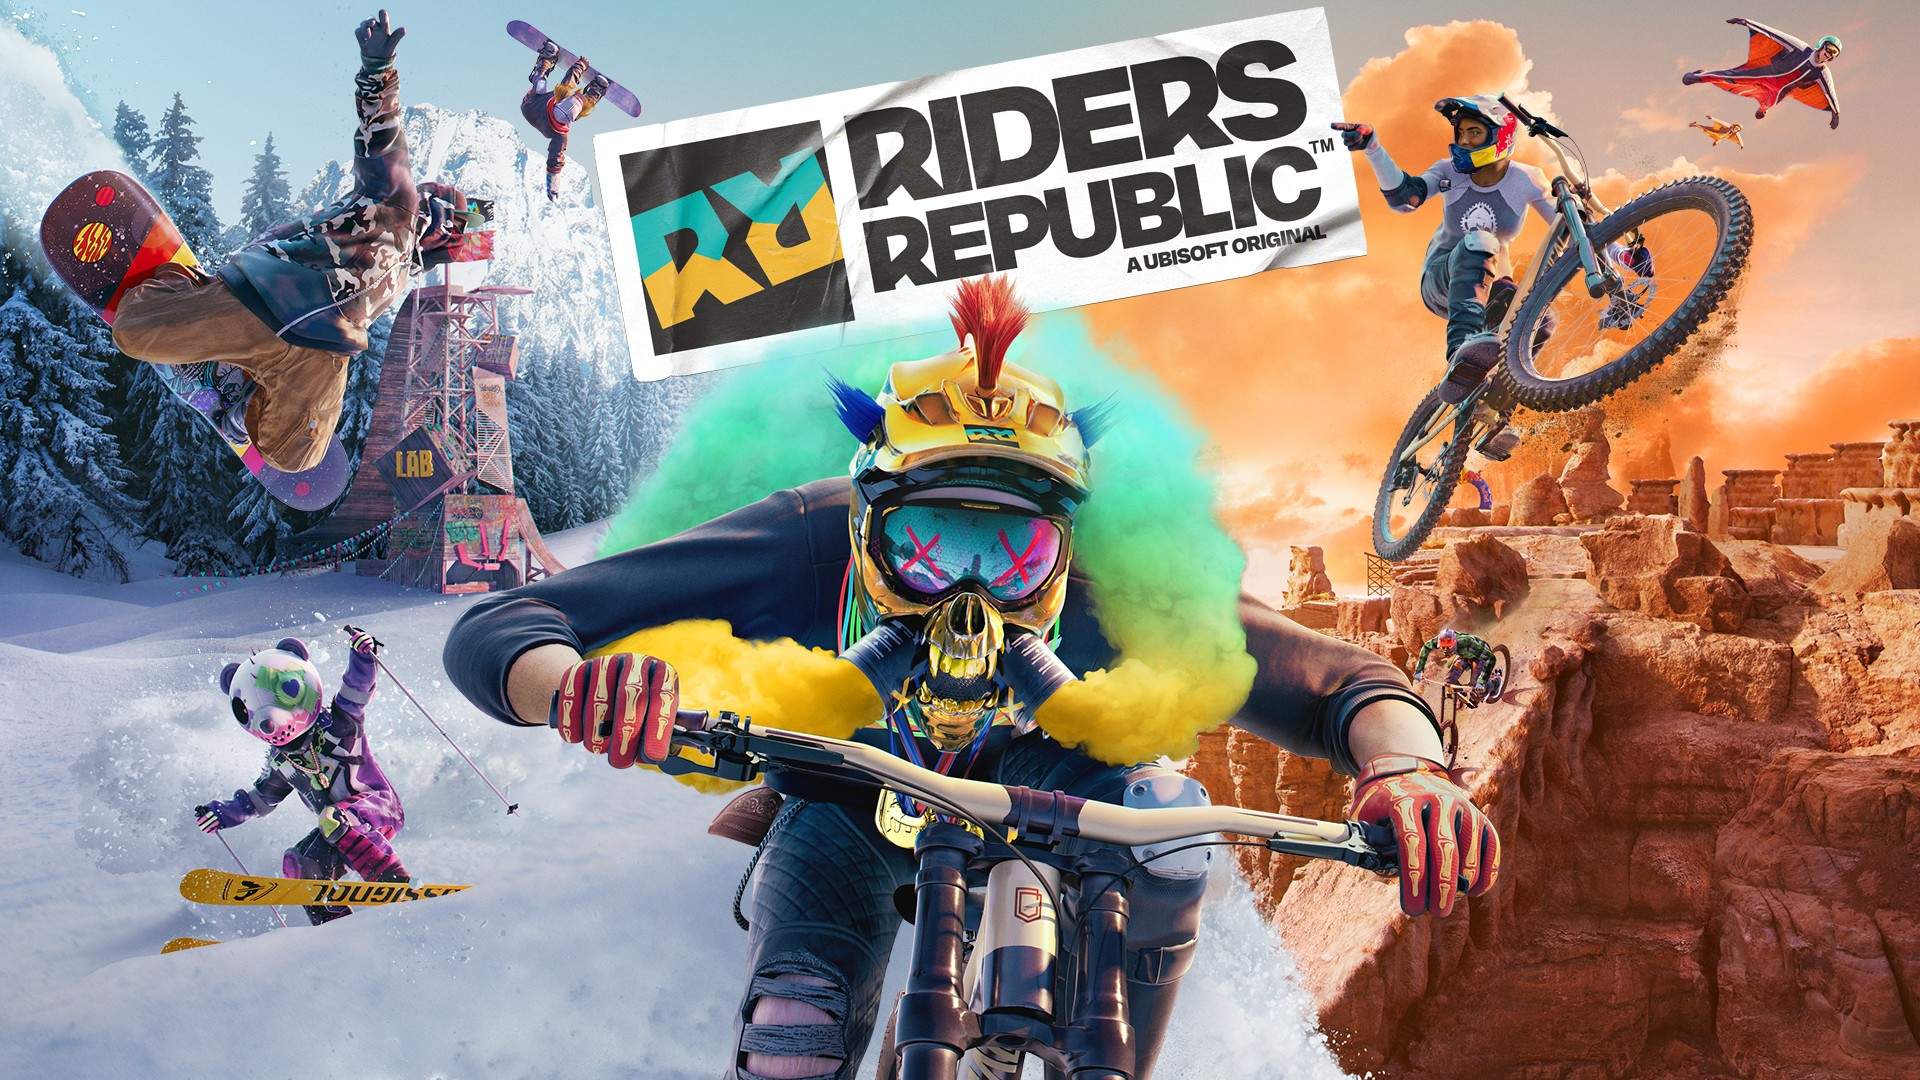 Riders Republic beta is opening to the community for the weekend!